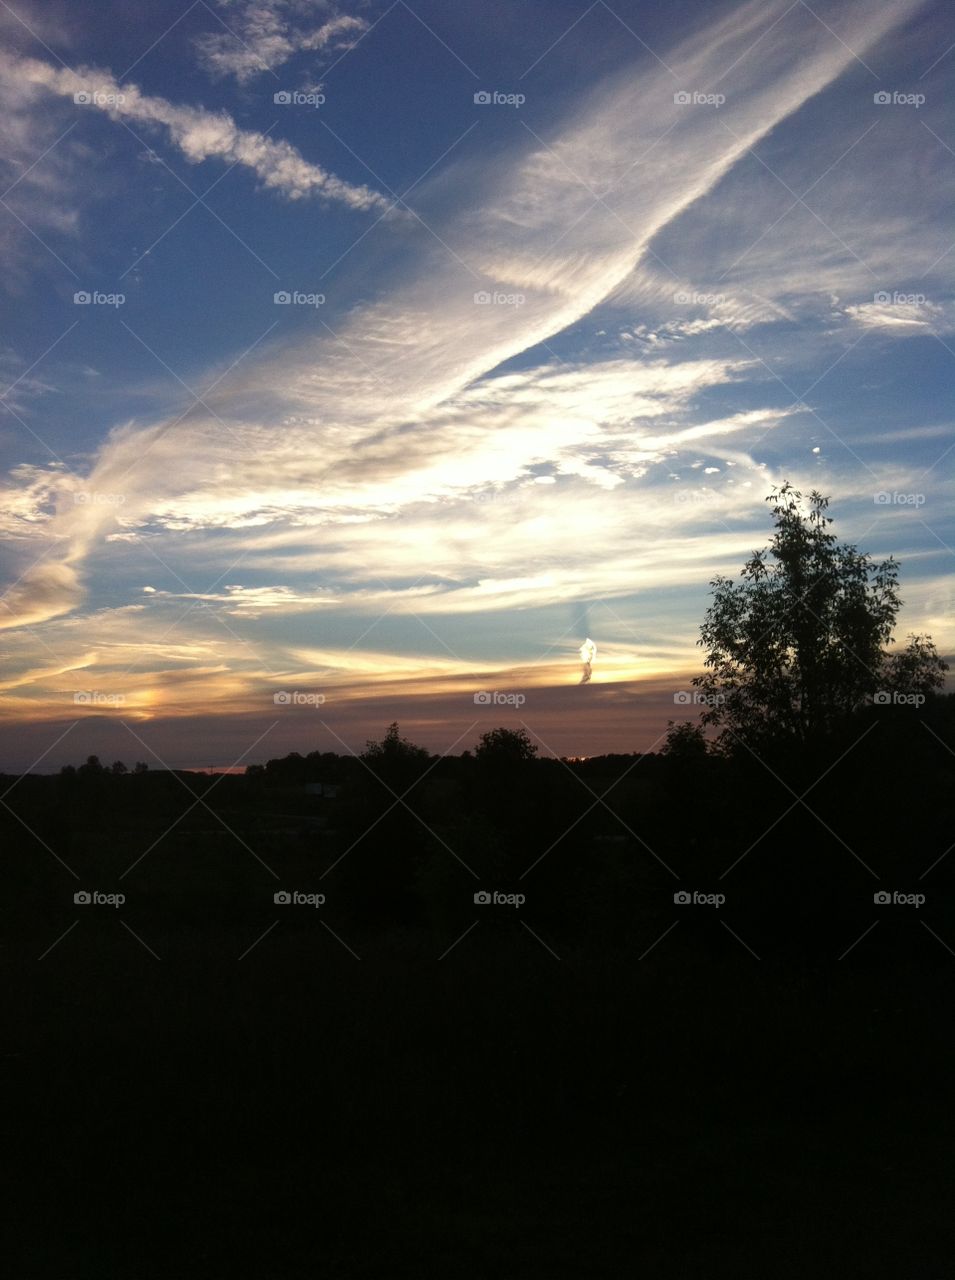 View from the Dog Park. Took this photo while at the dog park with my dog. Very pretty scene with the clouds, & sky. 